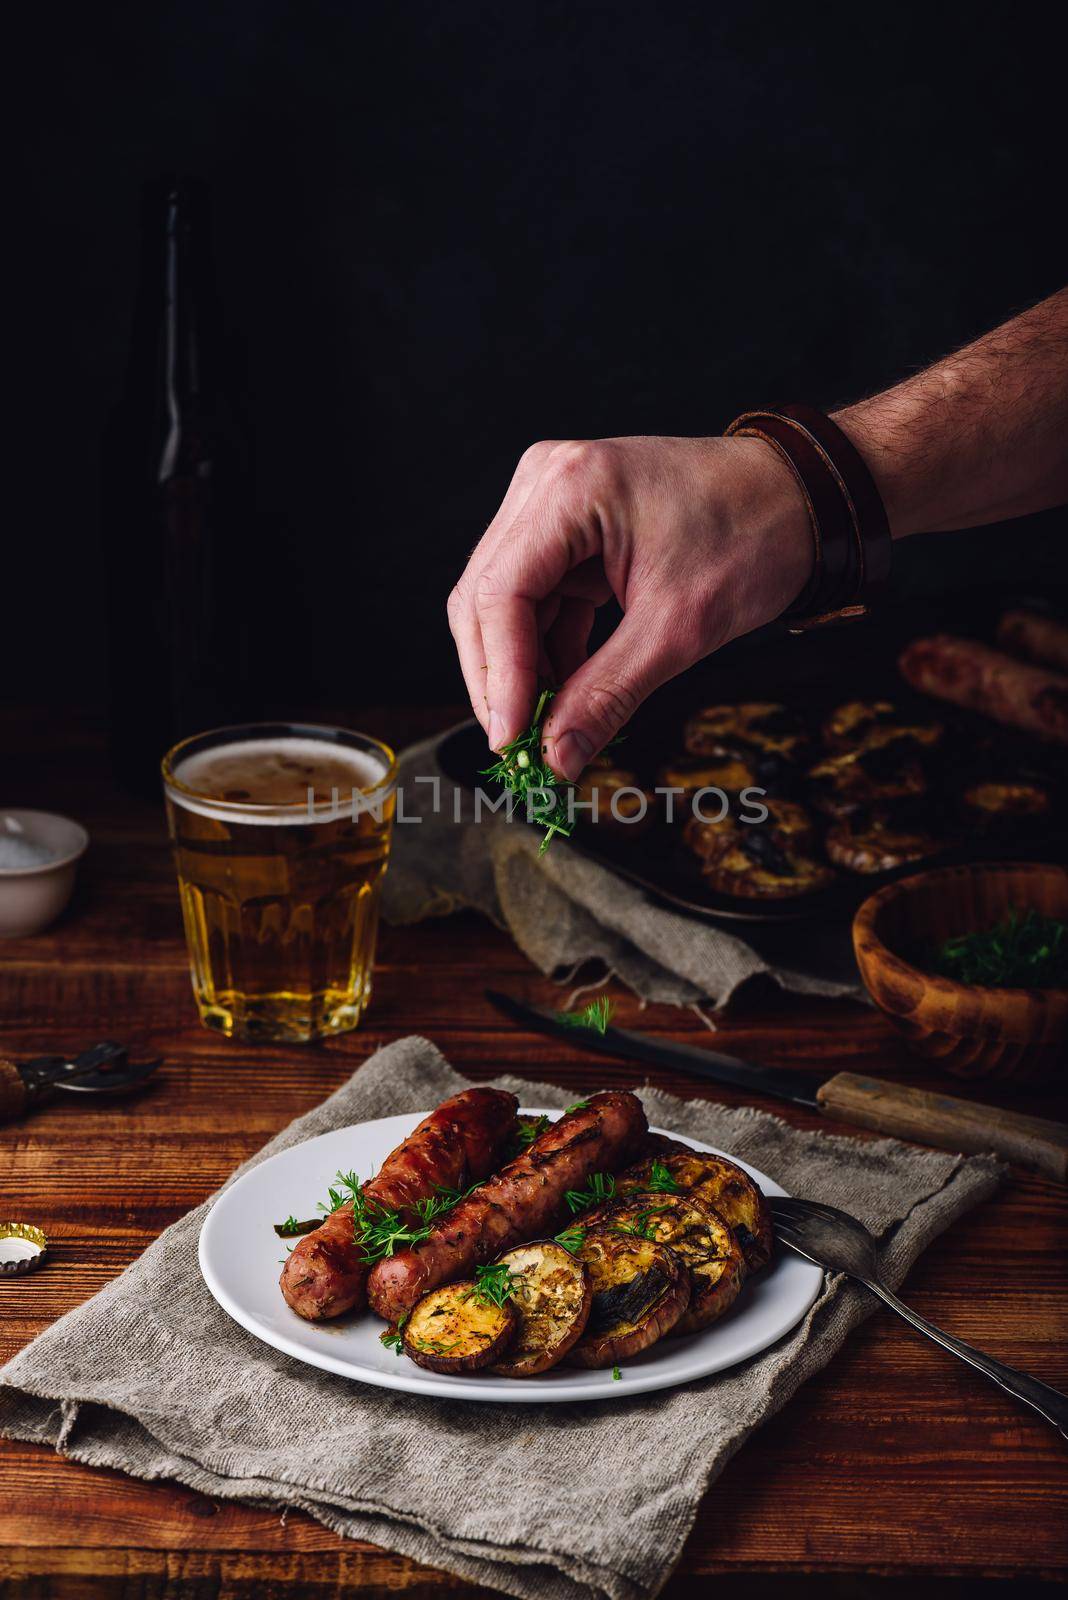 Pork Sausages Baked with Eggplant and Herbs on White Plate. Man Garnishing Meal with Dill